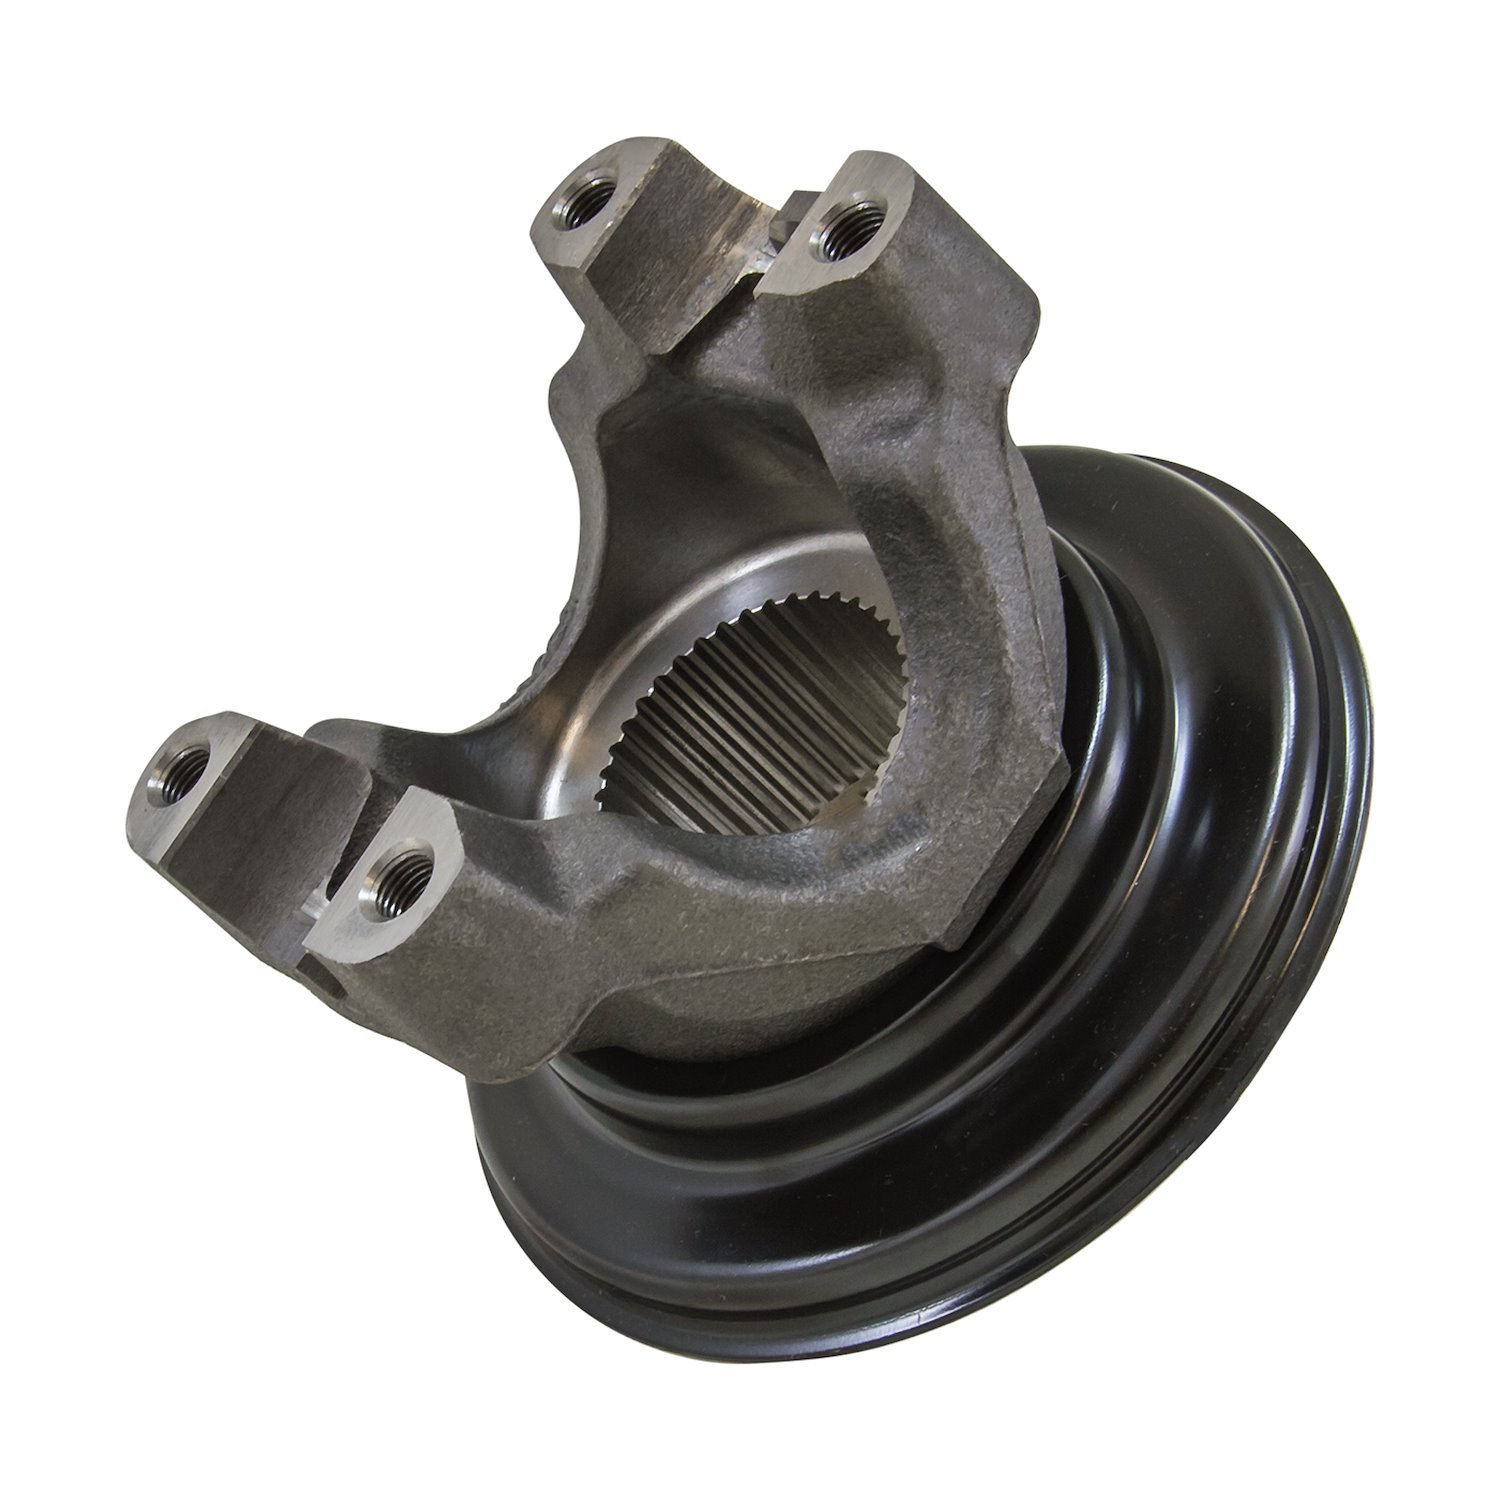 Replacement Pinion Yoke For Spicer S110, 1480 U/Joint Size